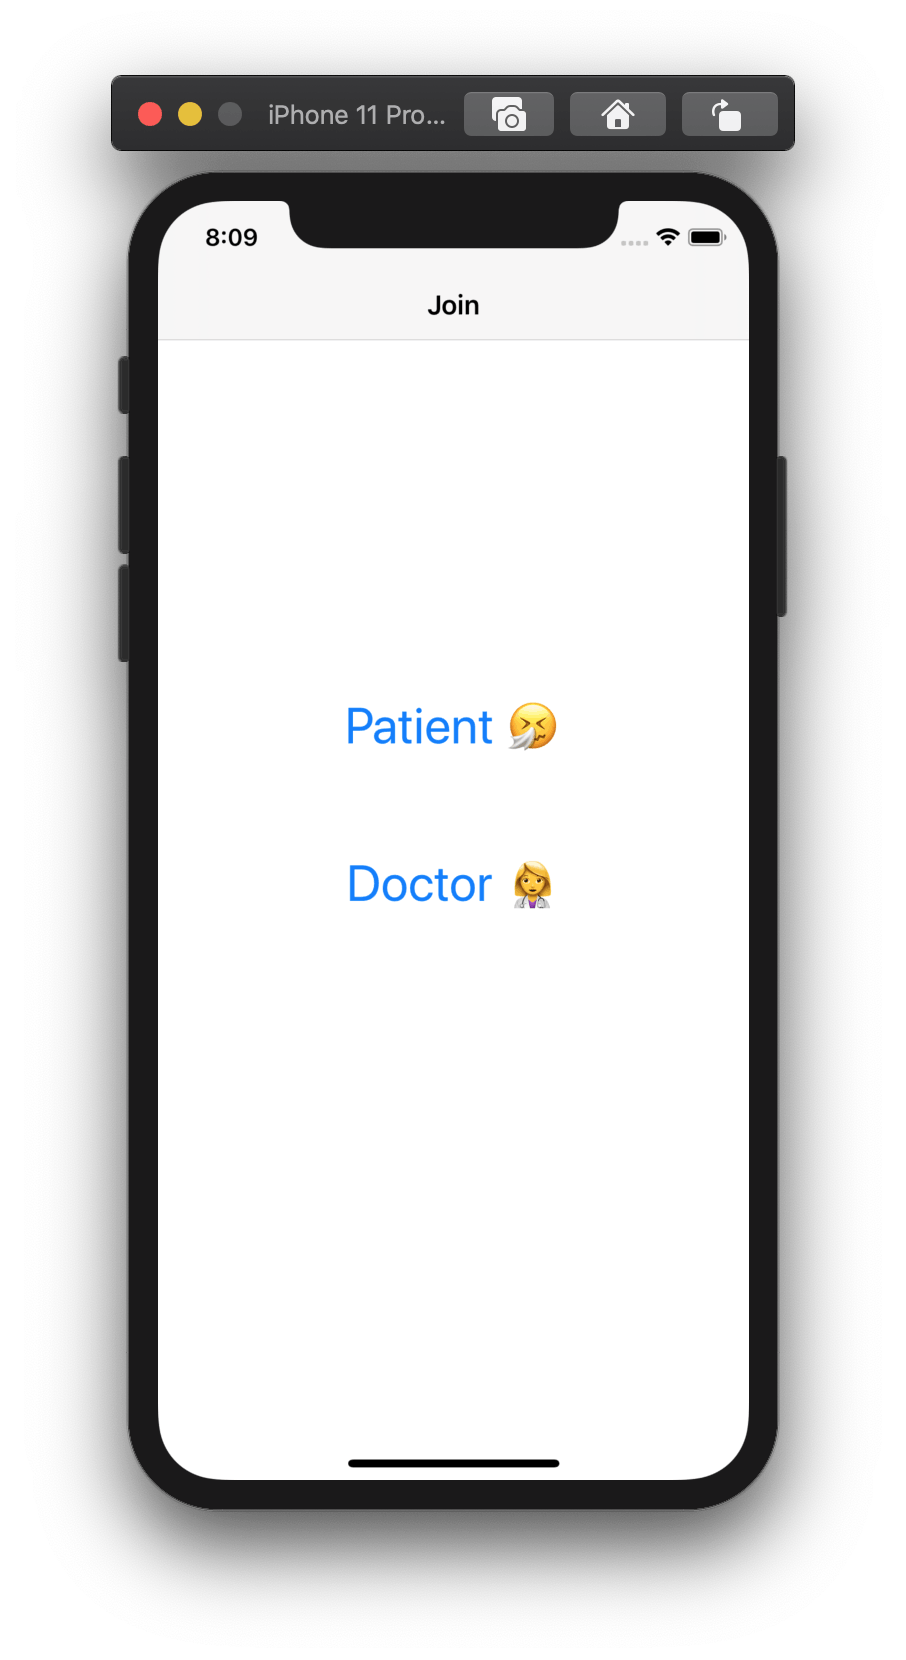 Screenshot shows an app with two buttons, one to join as the patient, and the other to join as the doctor